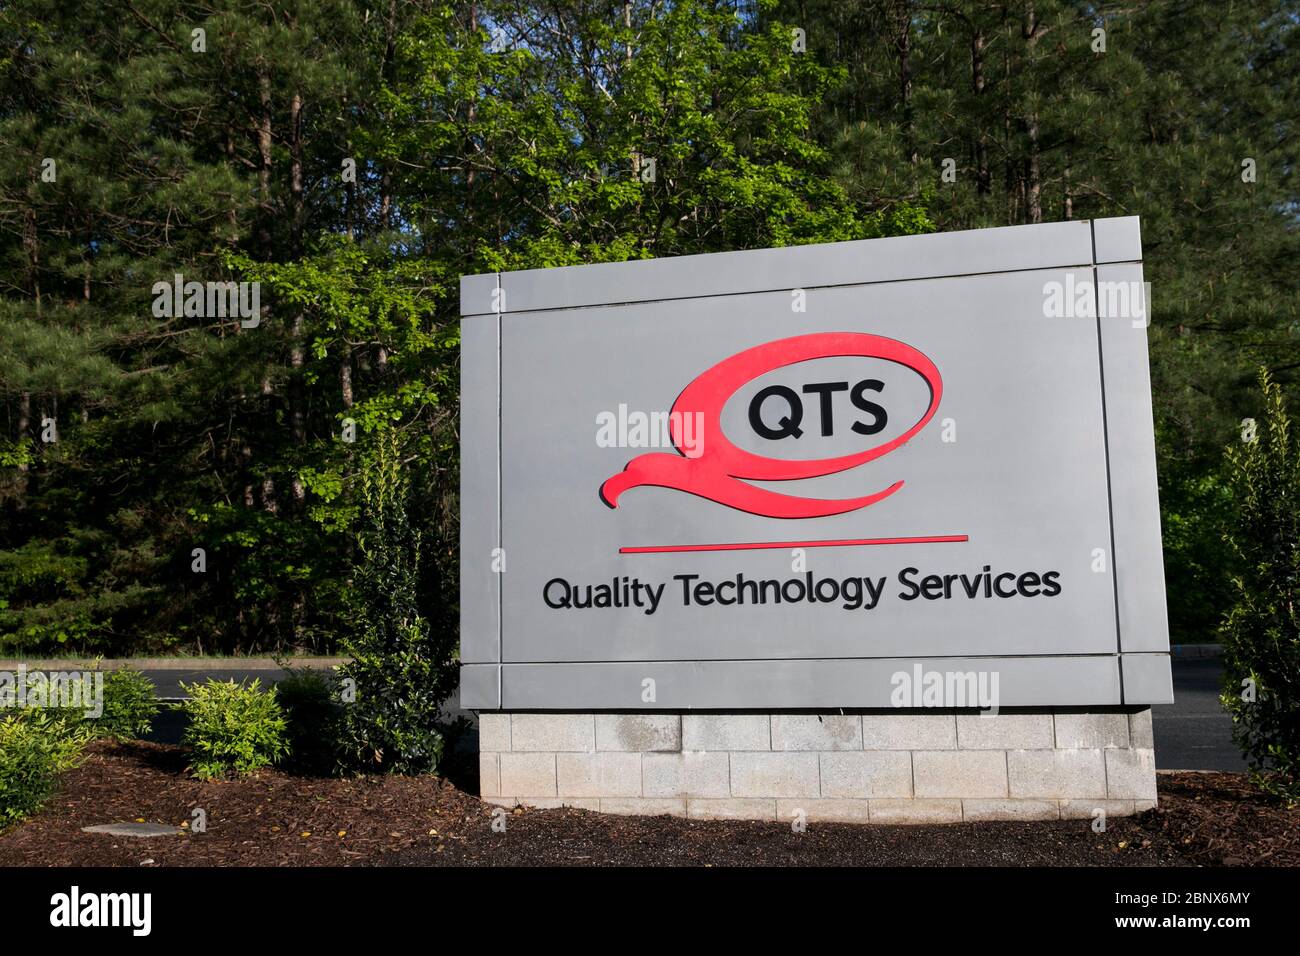 A logo sign outside of a Quality Technology Services (QTS) Data Center in Sandston, Virginia on May 2, 2020. Stock Photo